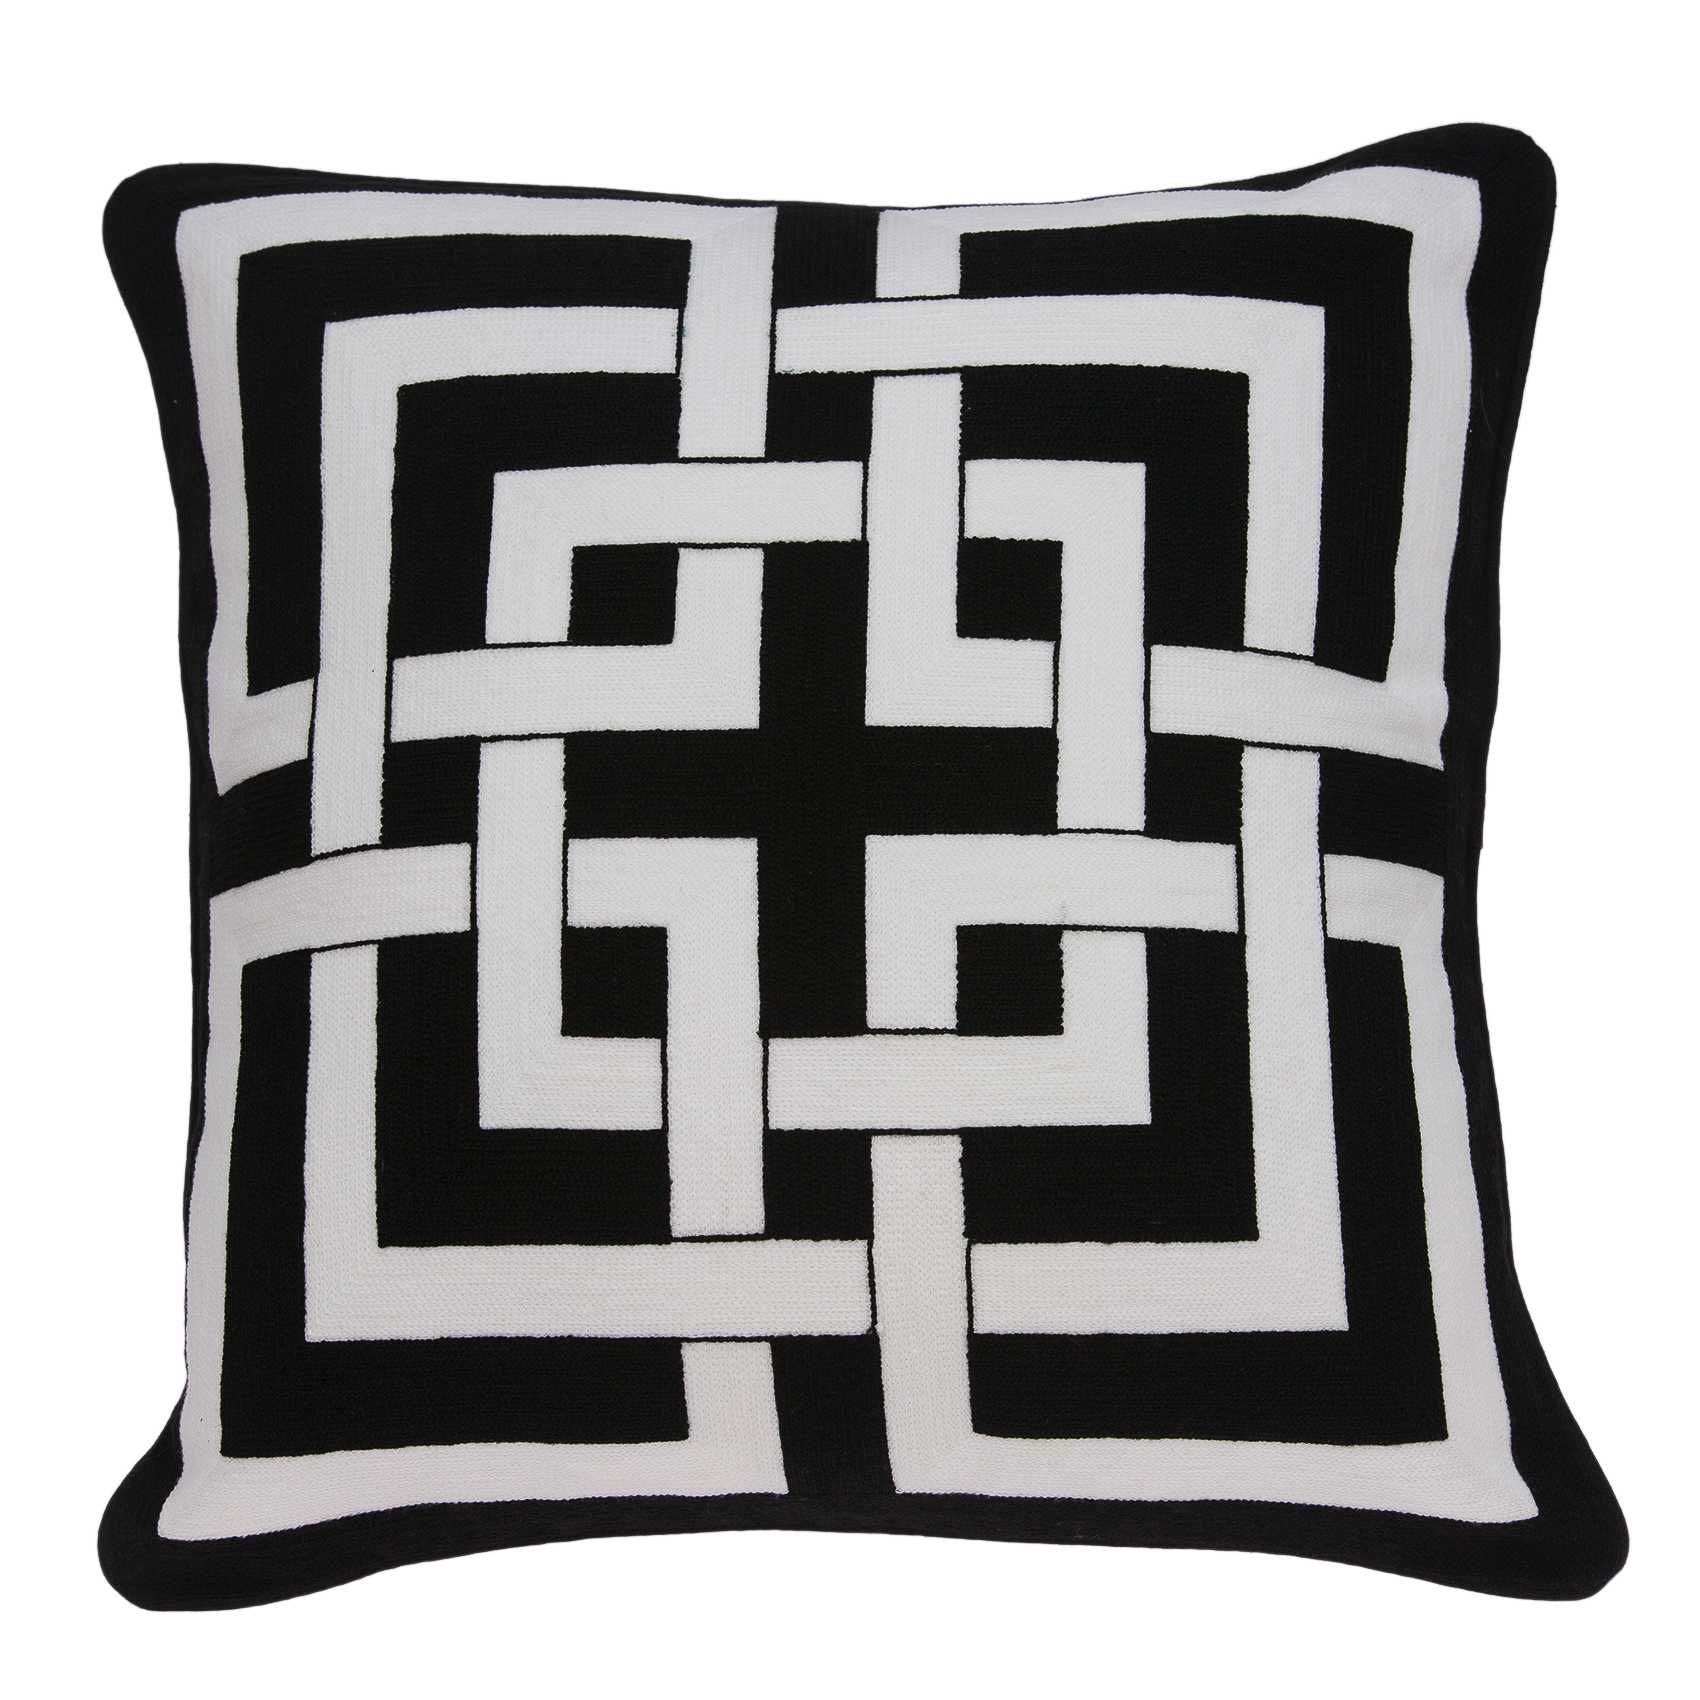 20" x 0.5" x 20" Transitional Black and White Accent Pillow Cover